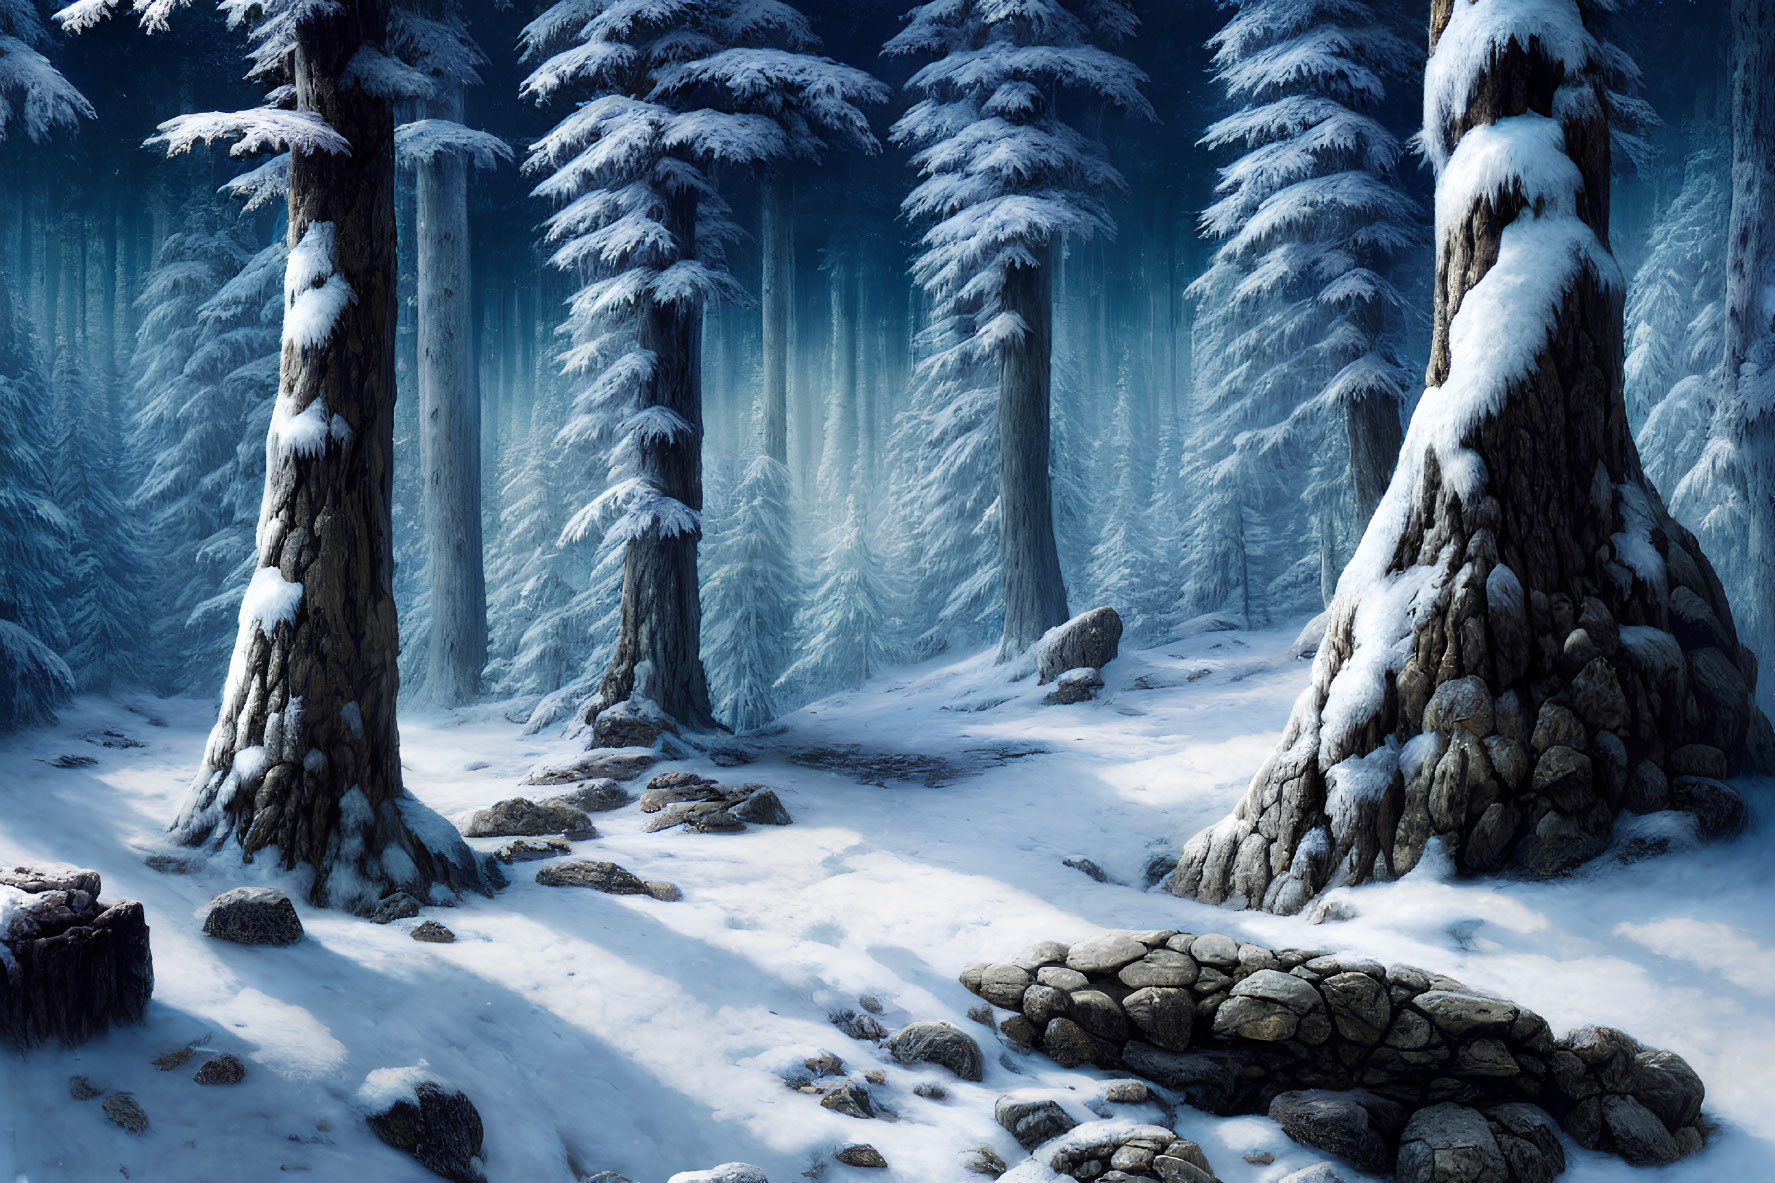 Winter forest scene with pine trees, stone bridge, and serene blue light